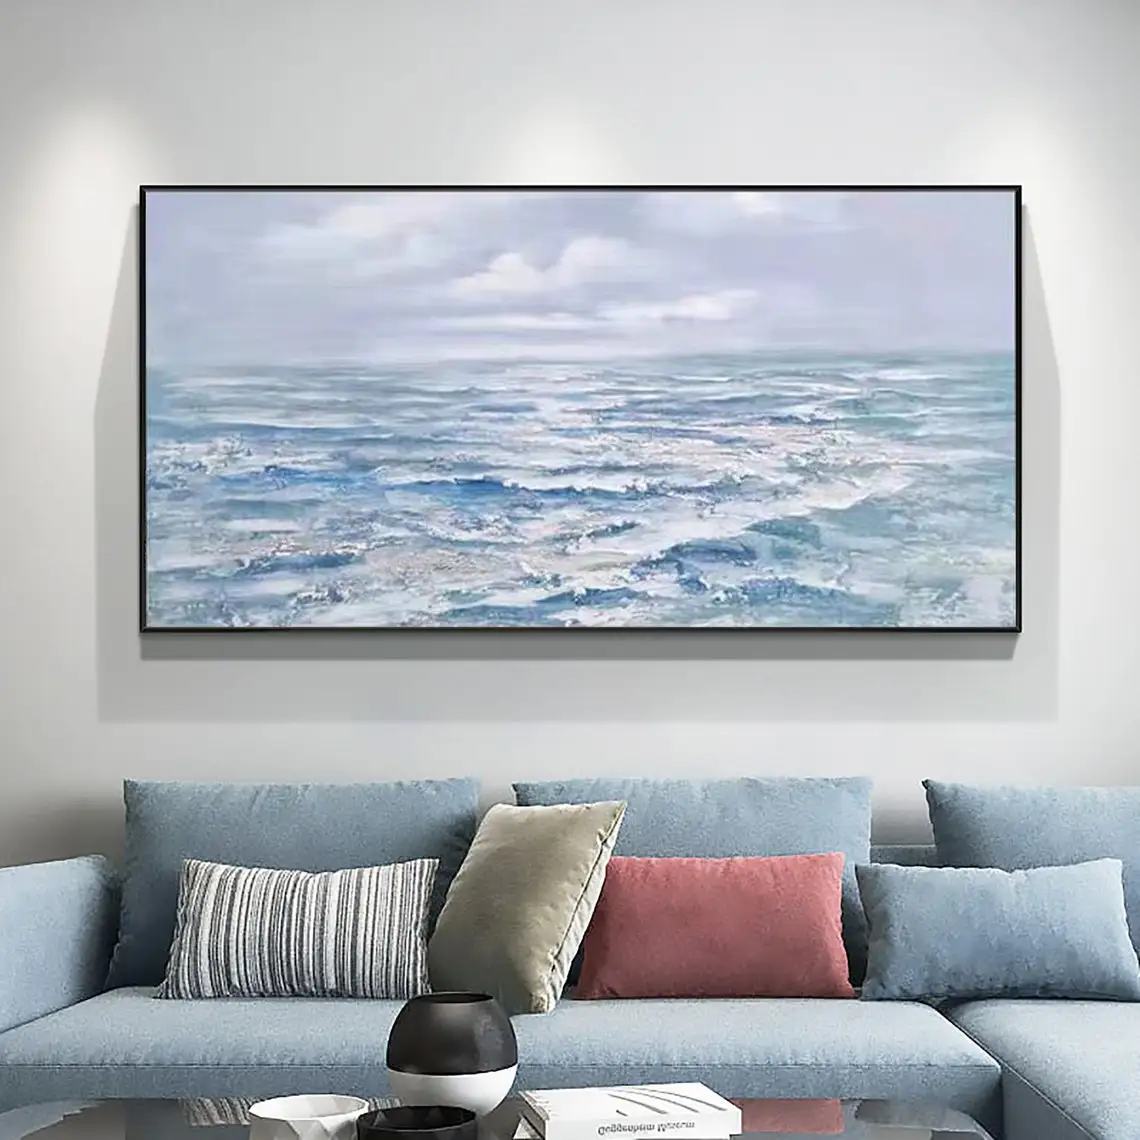 

Large Grey Ocean Handmade Oil Painting on Canvas Abstract Texture Seascape Acrylic Painting Wall Art Living Room Home Wall Decor